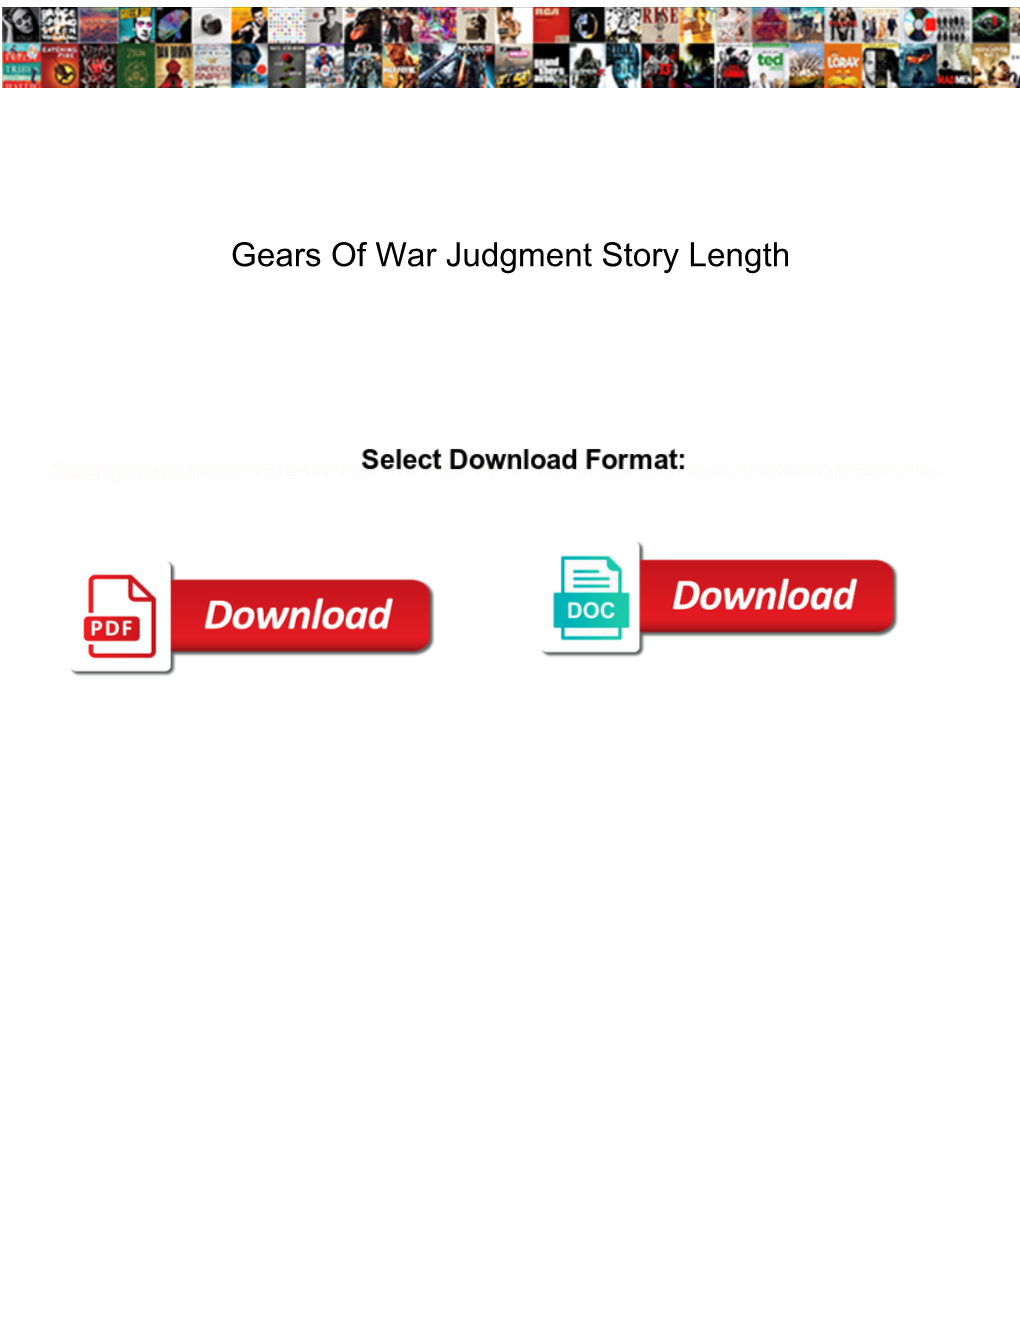 Gears of War Judgment Story Length